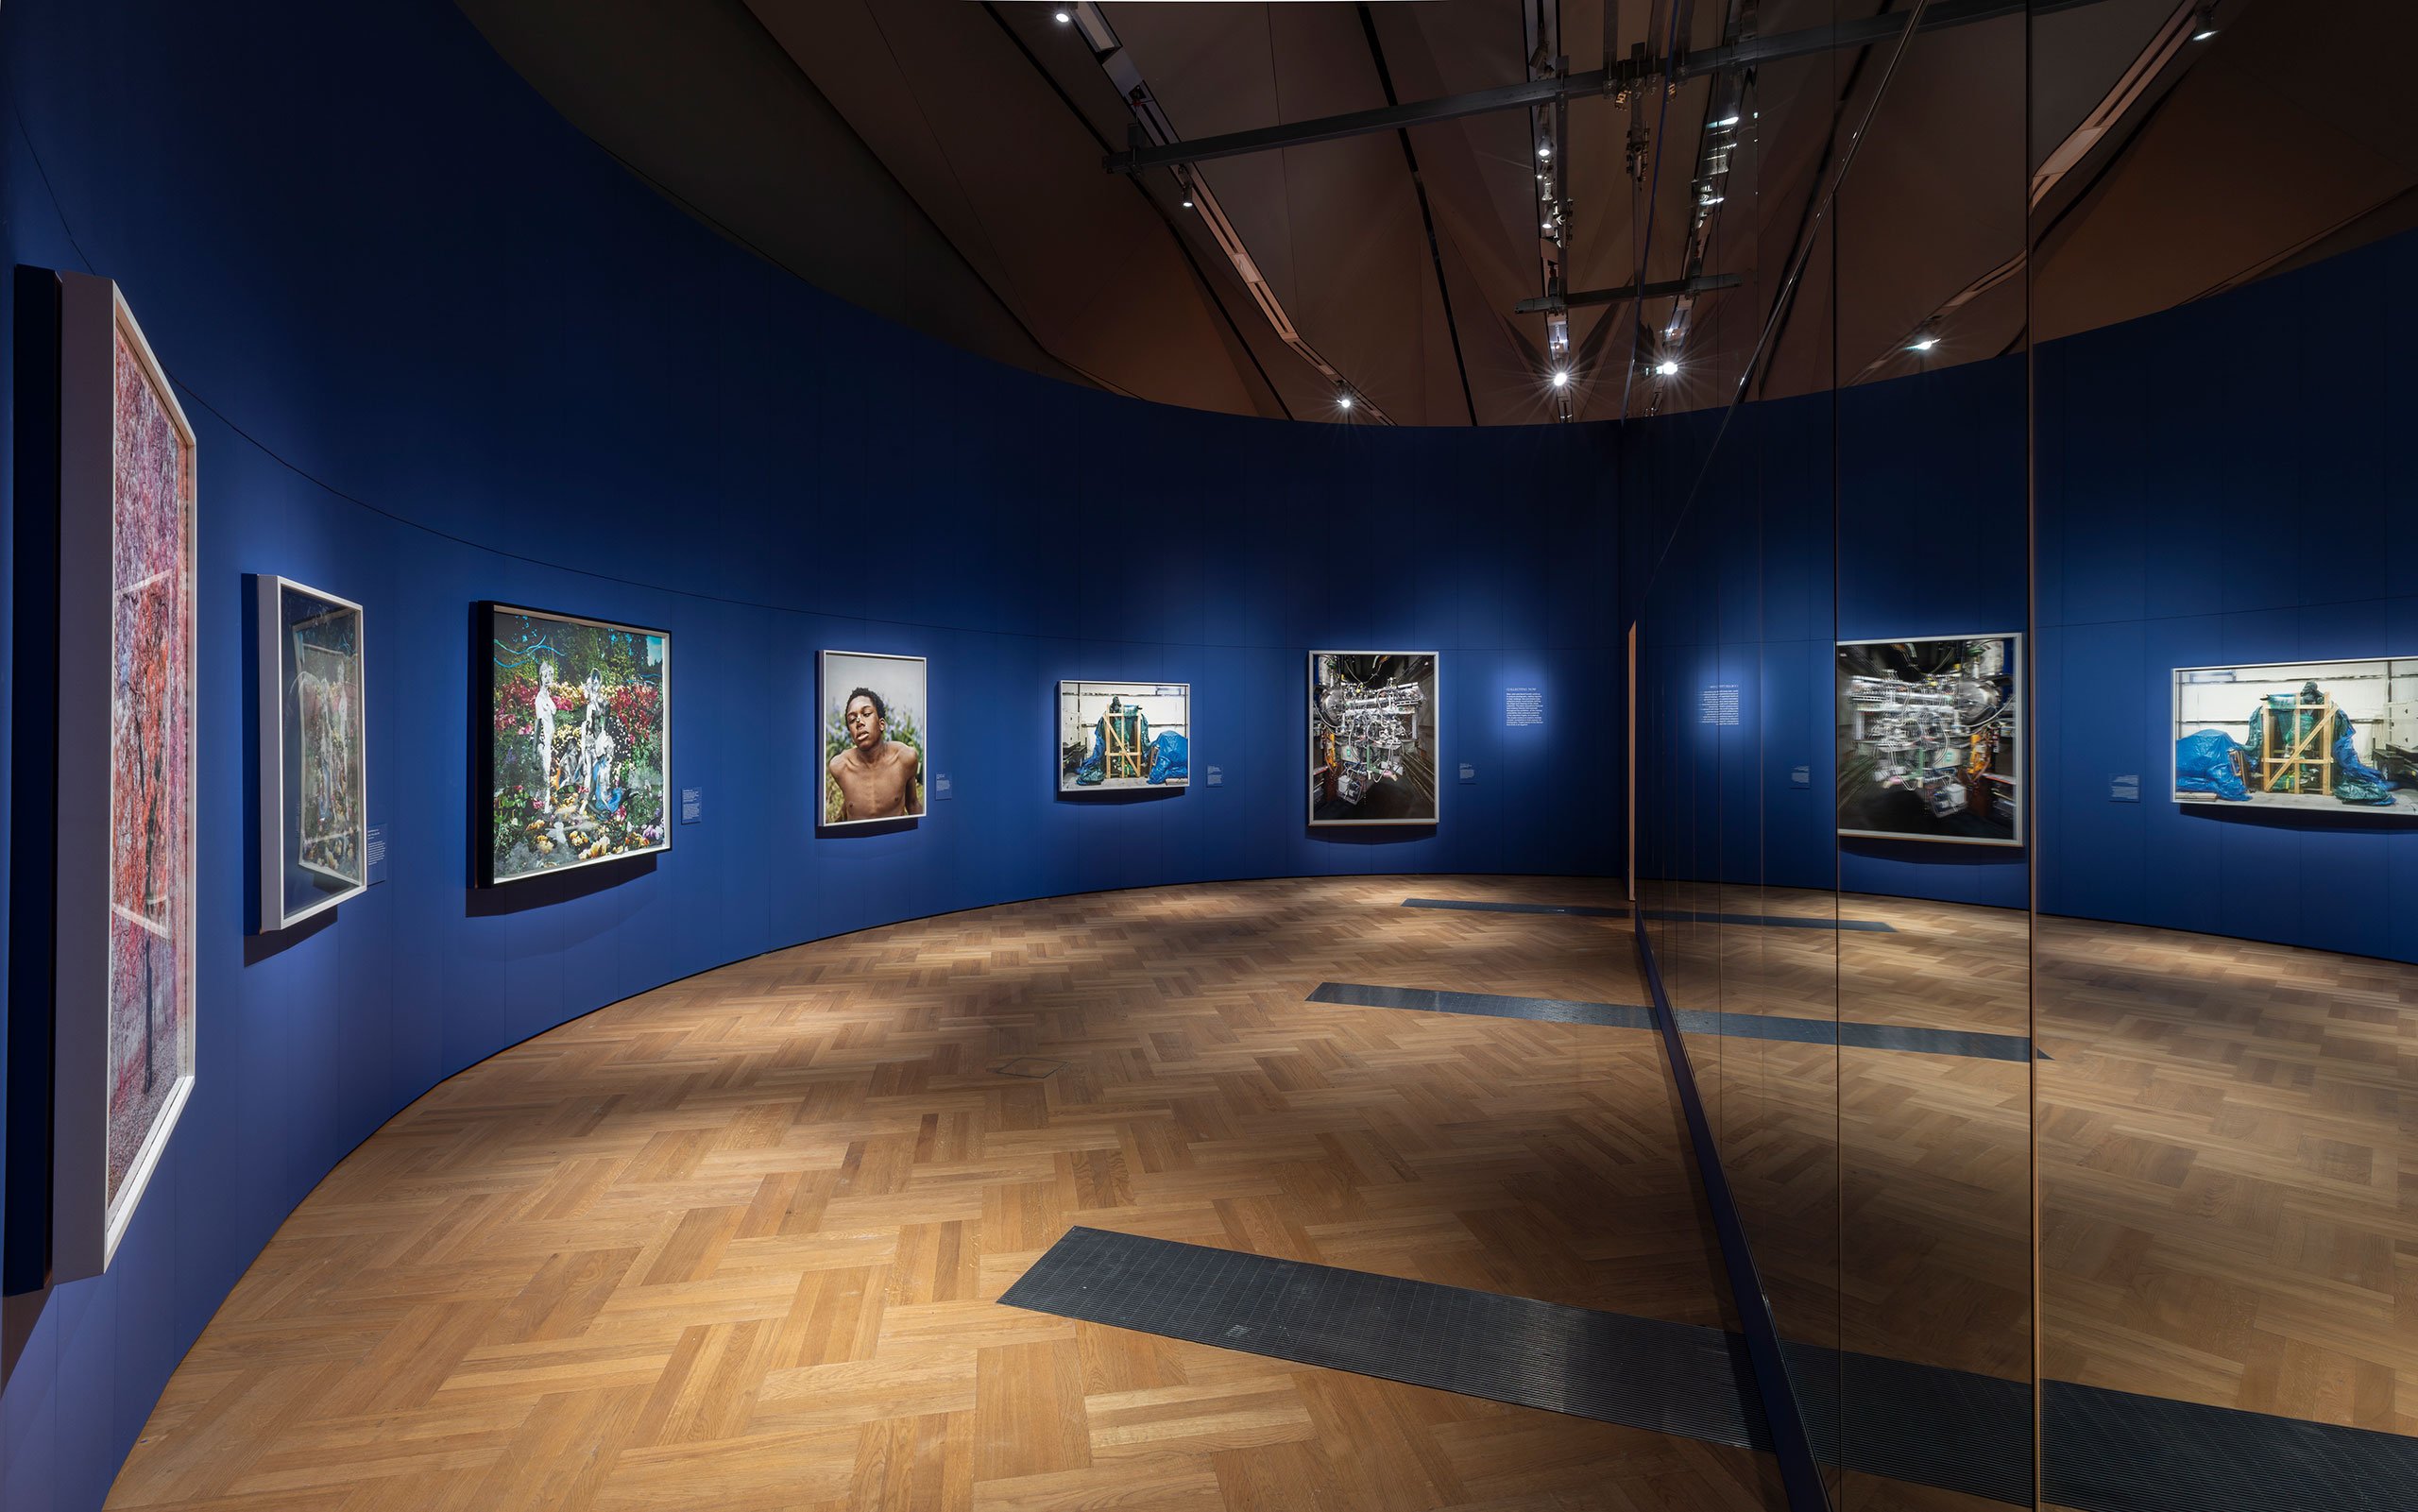 Installation view of "Fragile Beauty" at V&amp;A, South Kensington.
© Victoria and Albert Museum, London.